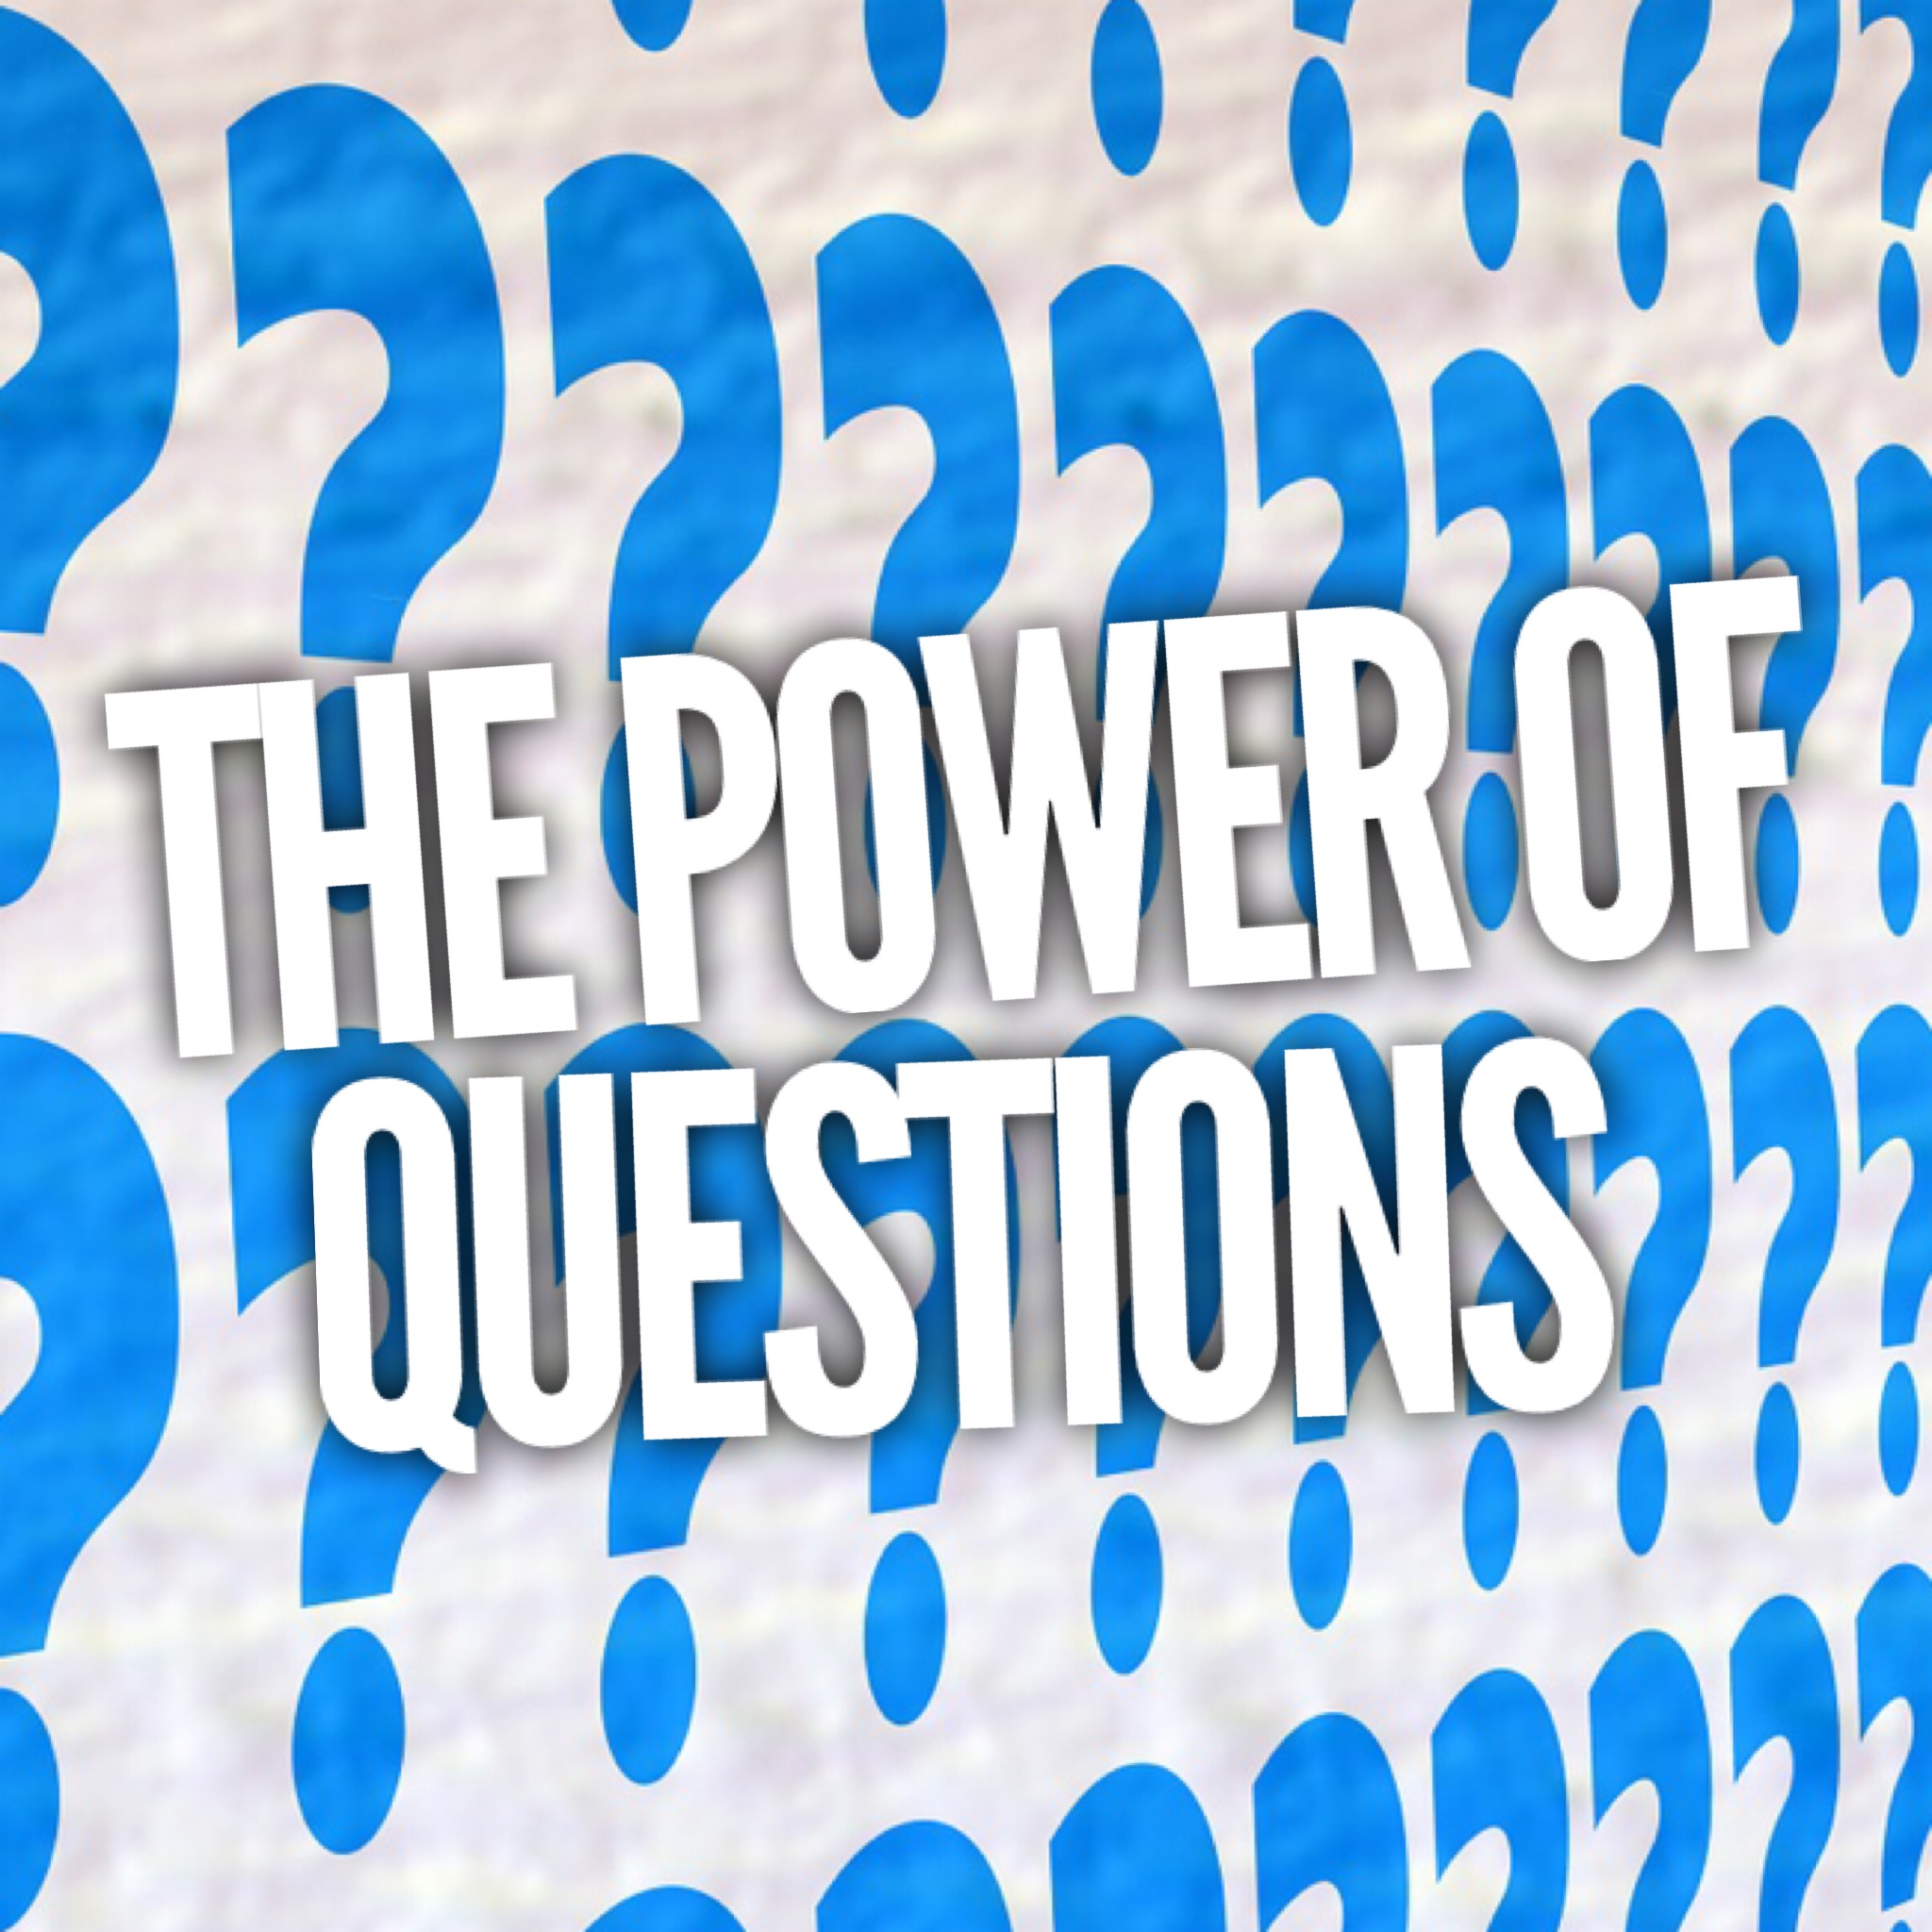 1/7/18: The Power of Questions